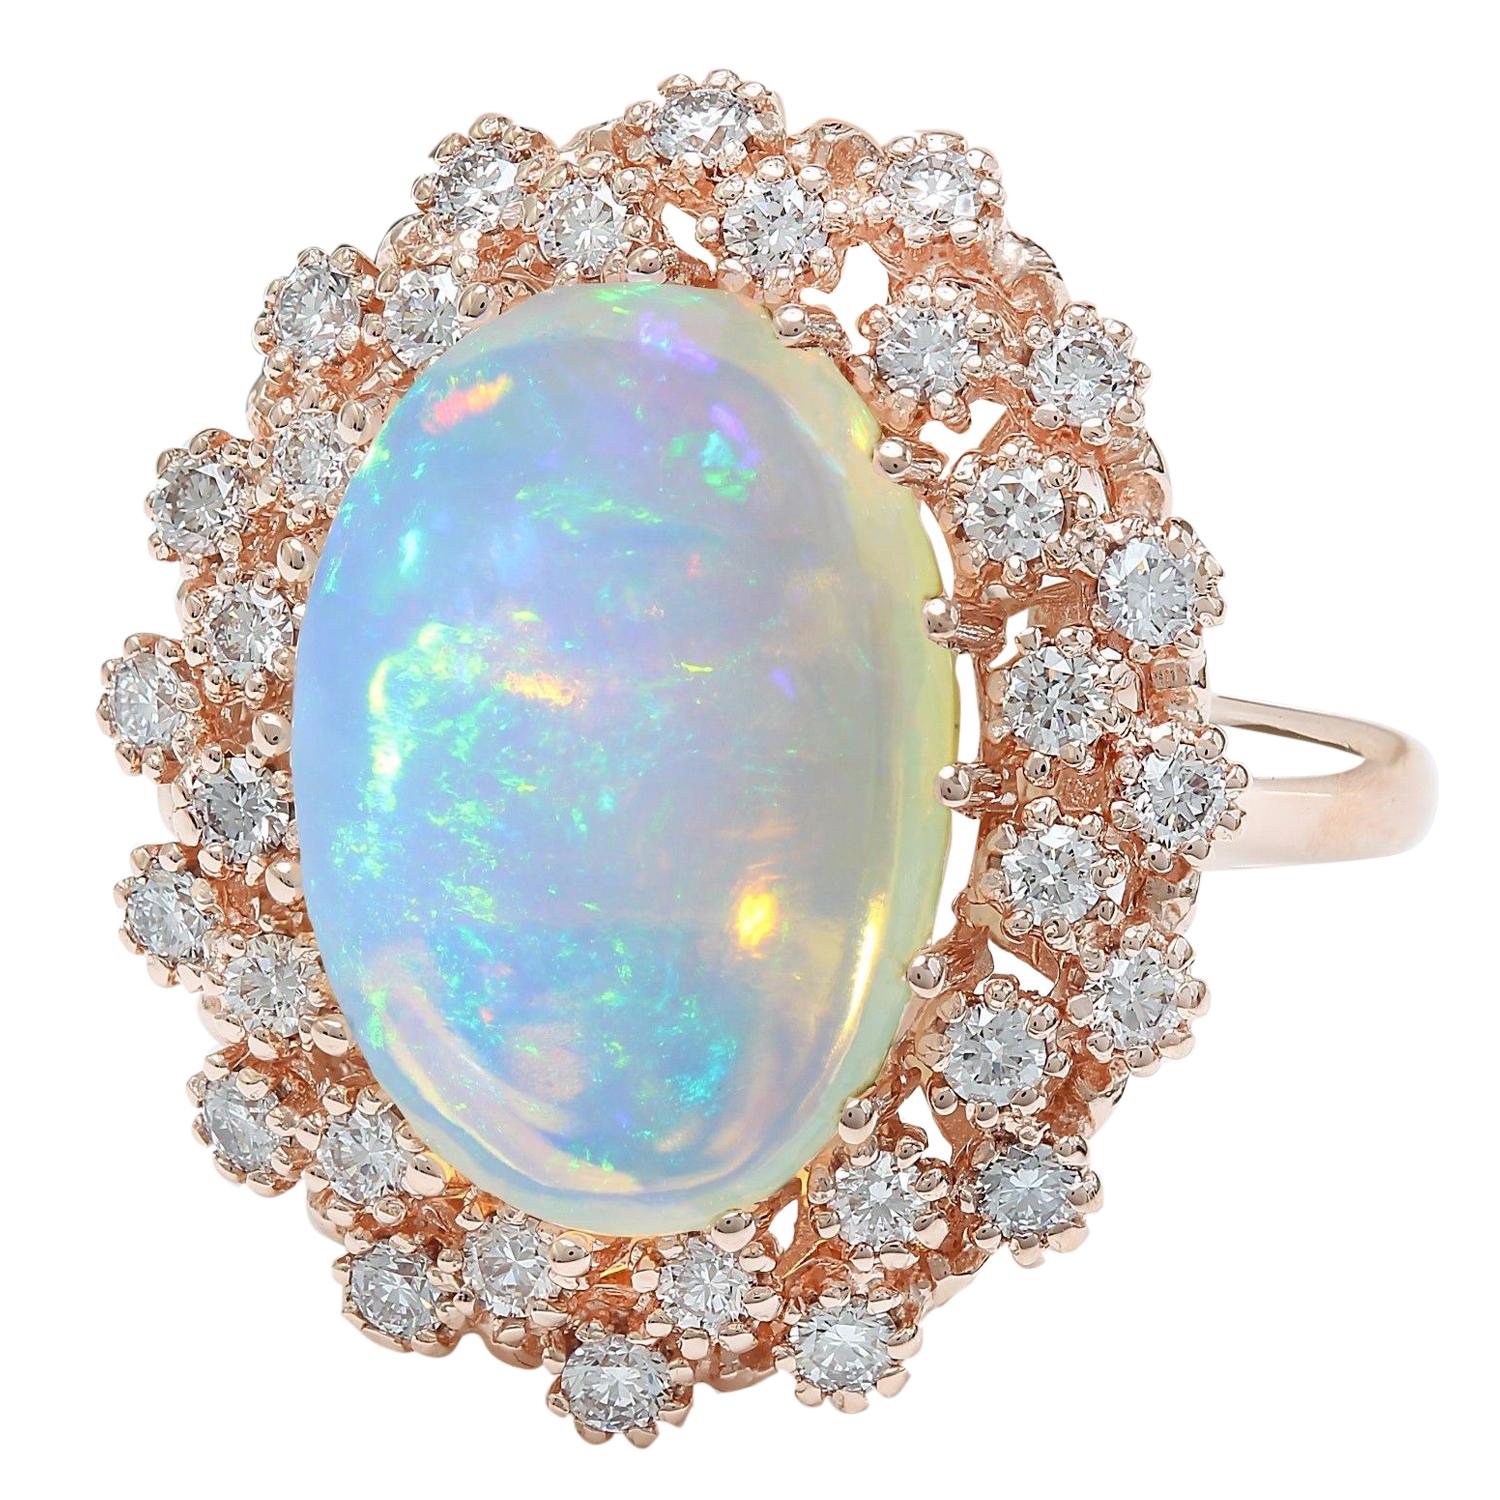 8.58 Carat Natural Opal 14K Solid Rose Gold Diamond Ring
 Item Type: Ring
 Item Style: Cocktail
 Material: 14K Rose Gold
 Mainstone: Opal
 Stone Color: Multicolor
 Stone Weight: 7.68 Carat
 Stone Shape: Oval
 Stone Quantity: 1
 Stone Dimensions: